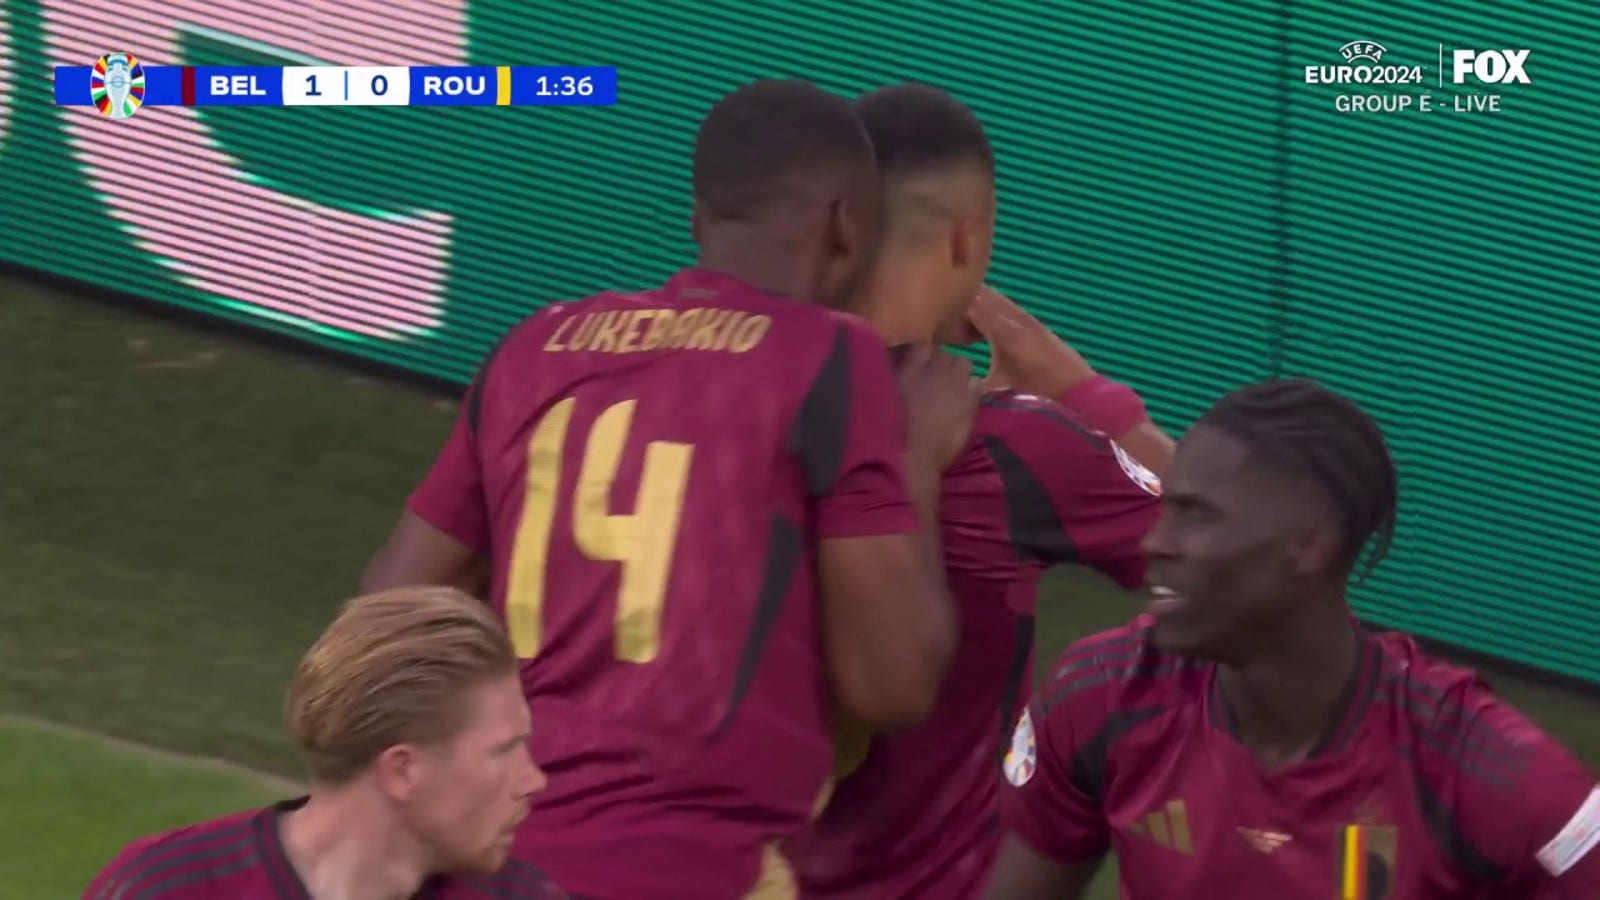 Youri Tielemans scores in the second minute and gives Belgium a 1-0 lead vs. Romania | UEFA Euro 2024